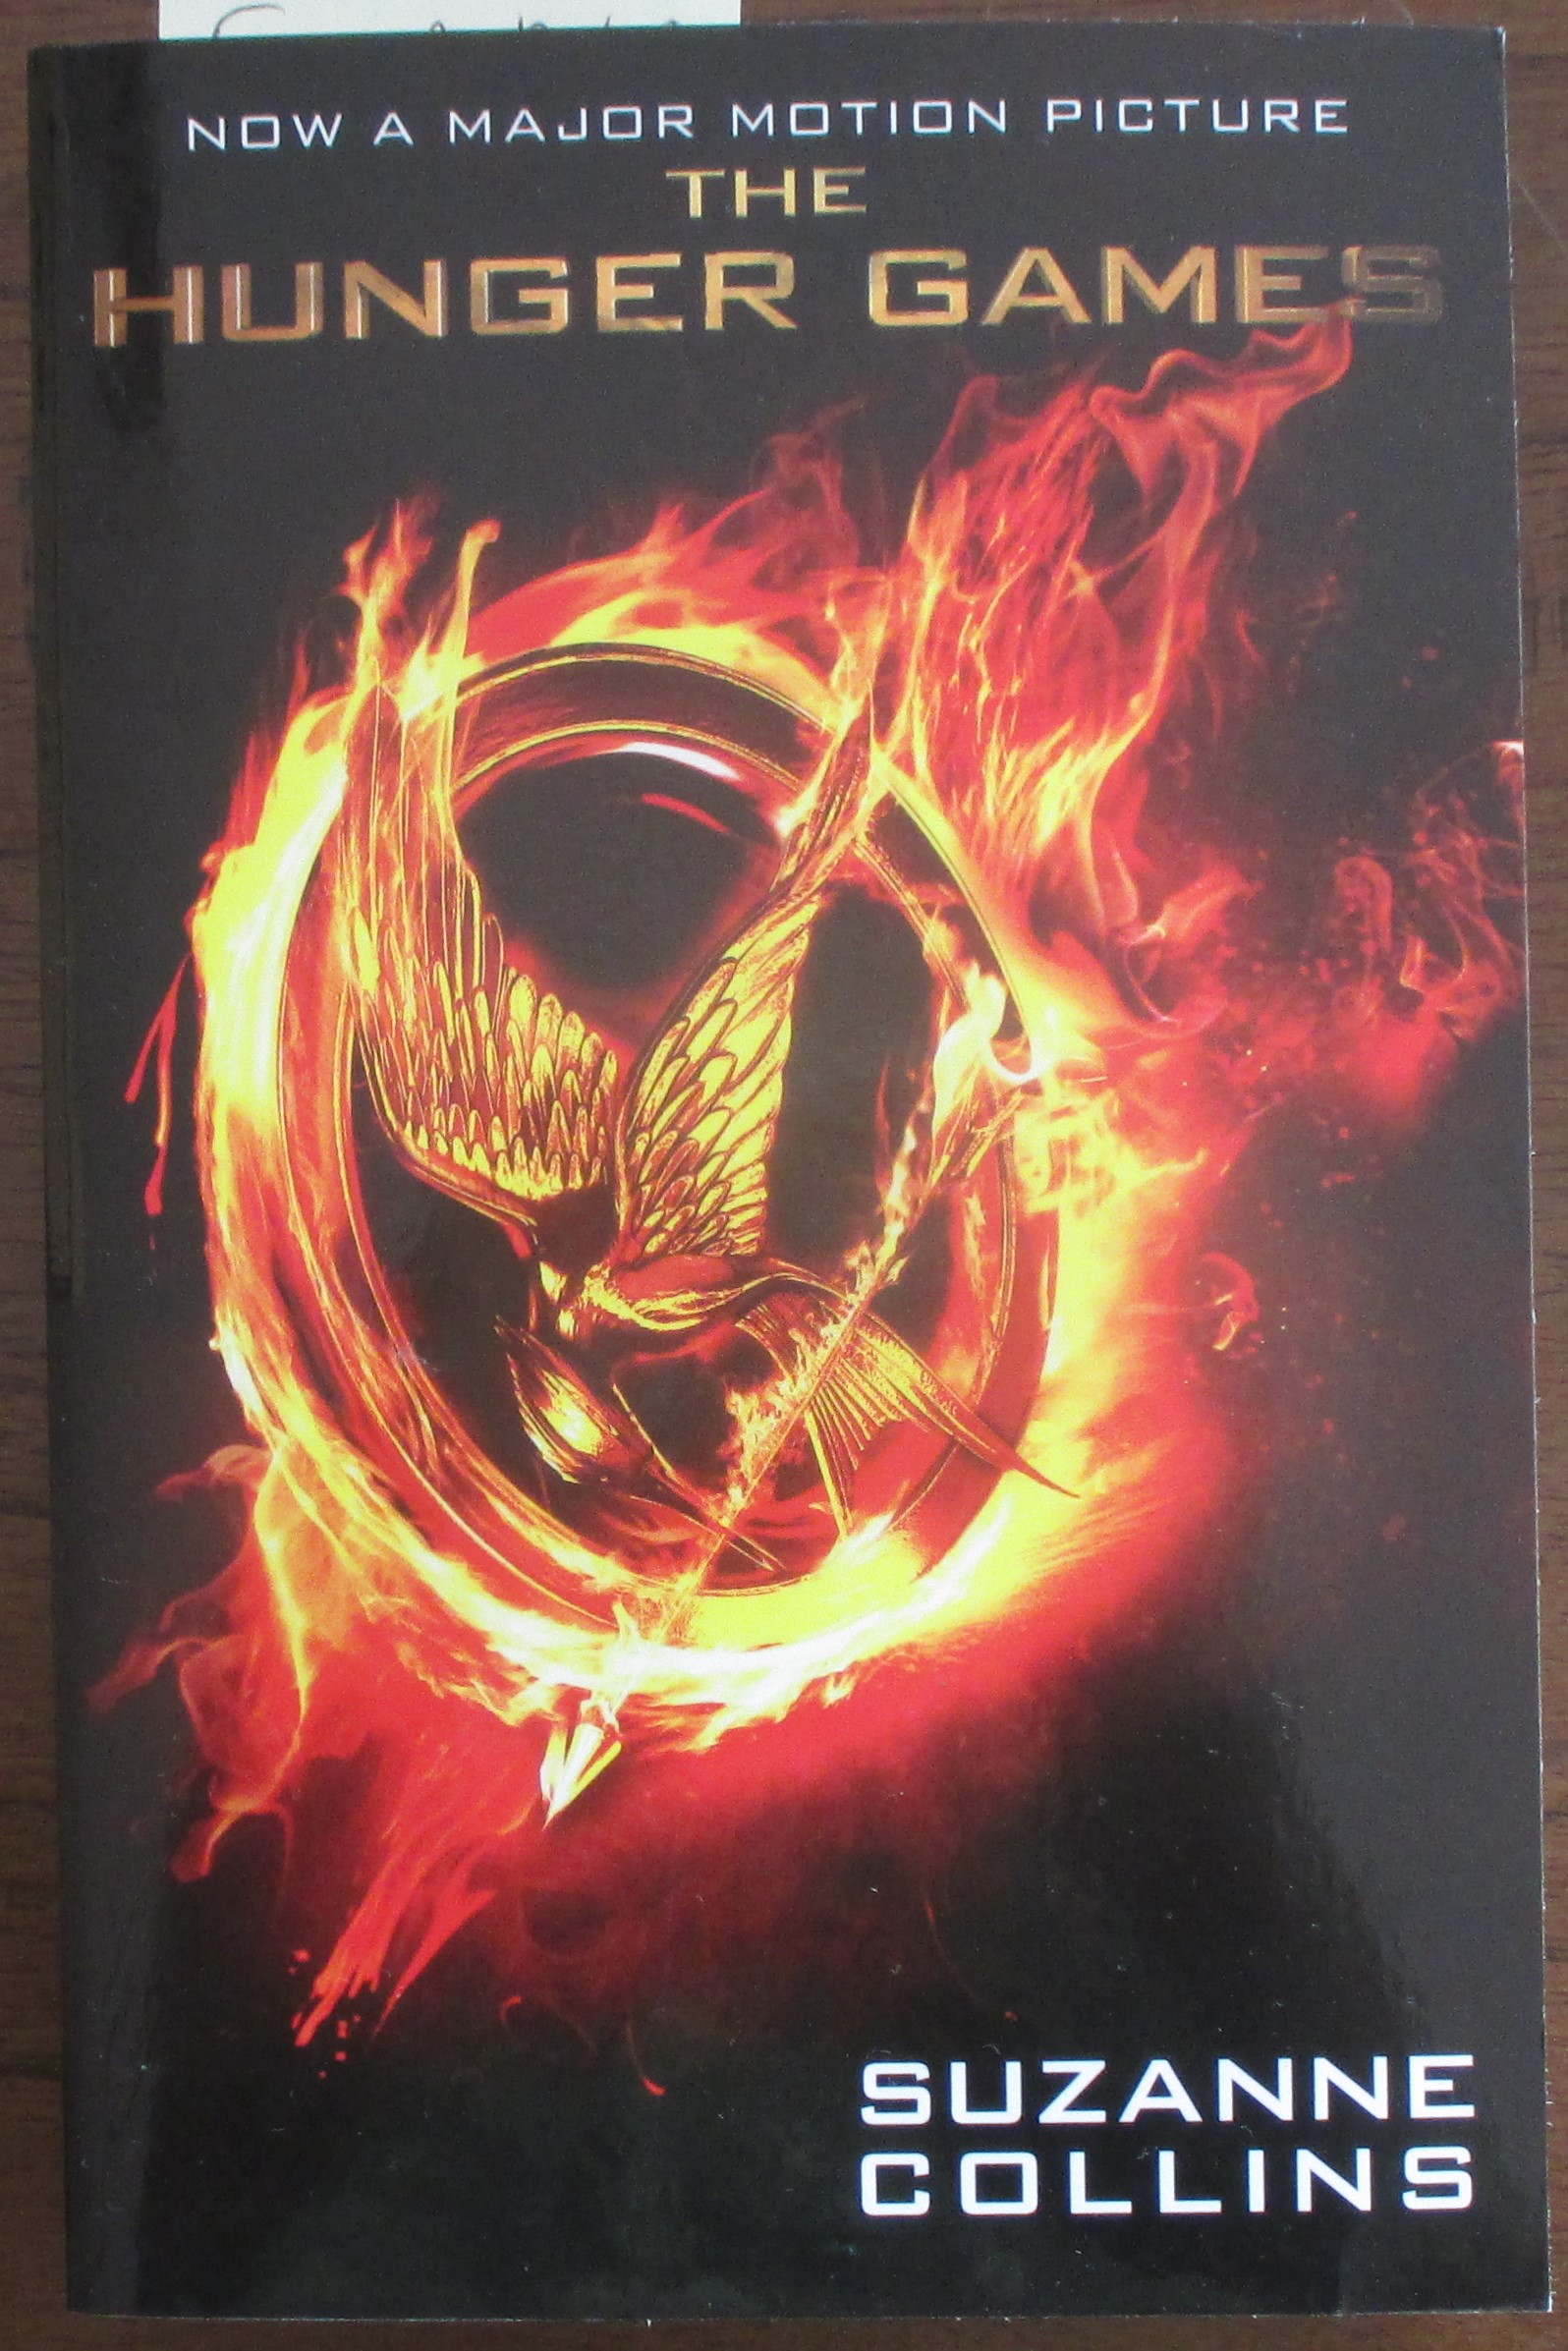 how-many-pages-does-the-hunger-games-have-tessera-2022-10-31